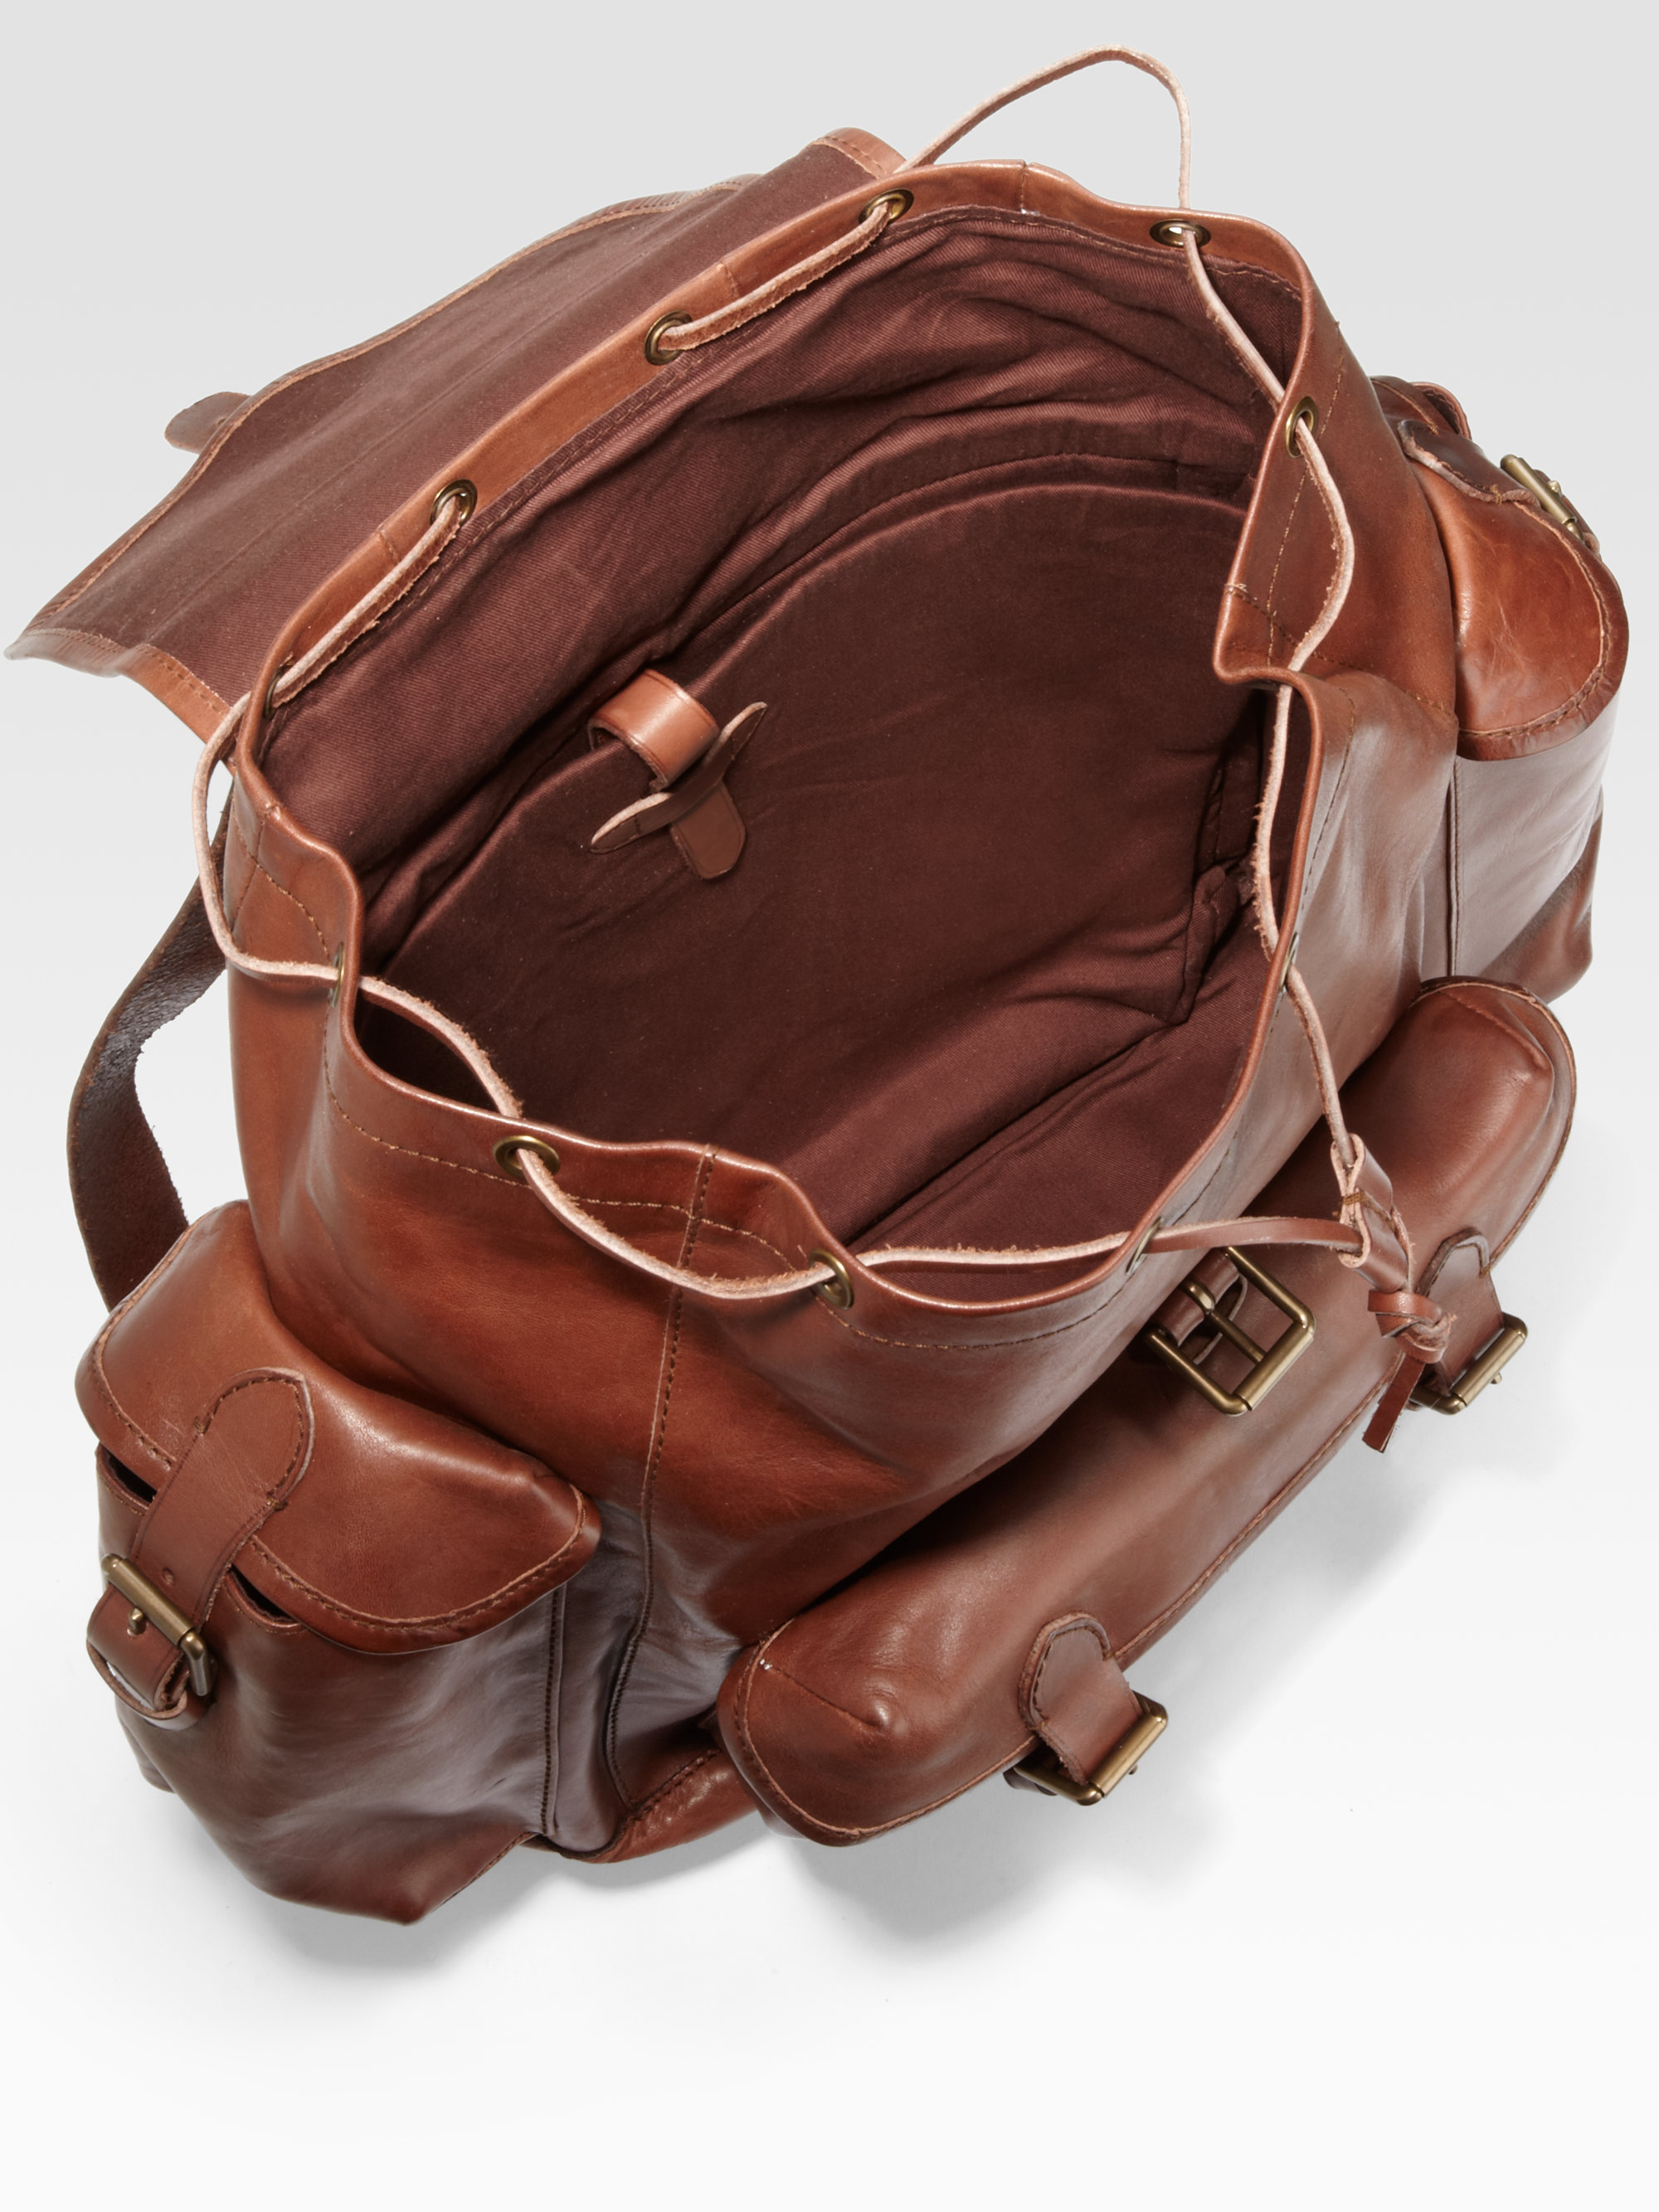 Polo Ralph Lauren Leather Backpack in Brown for Men - Lyst